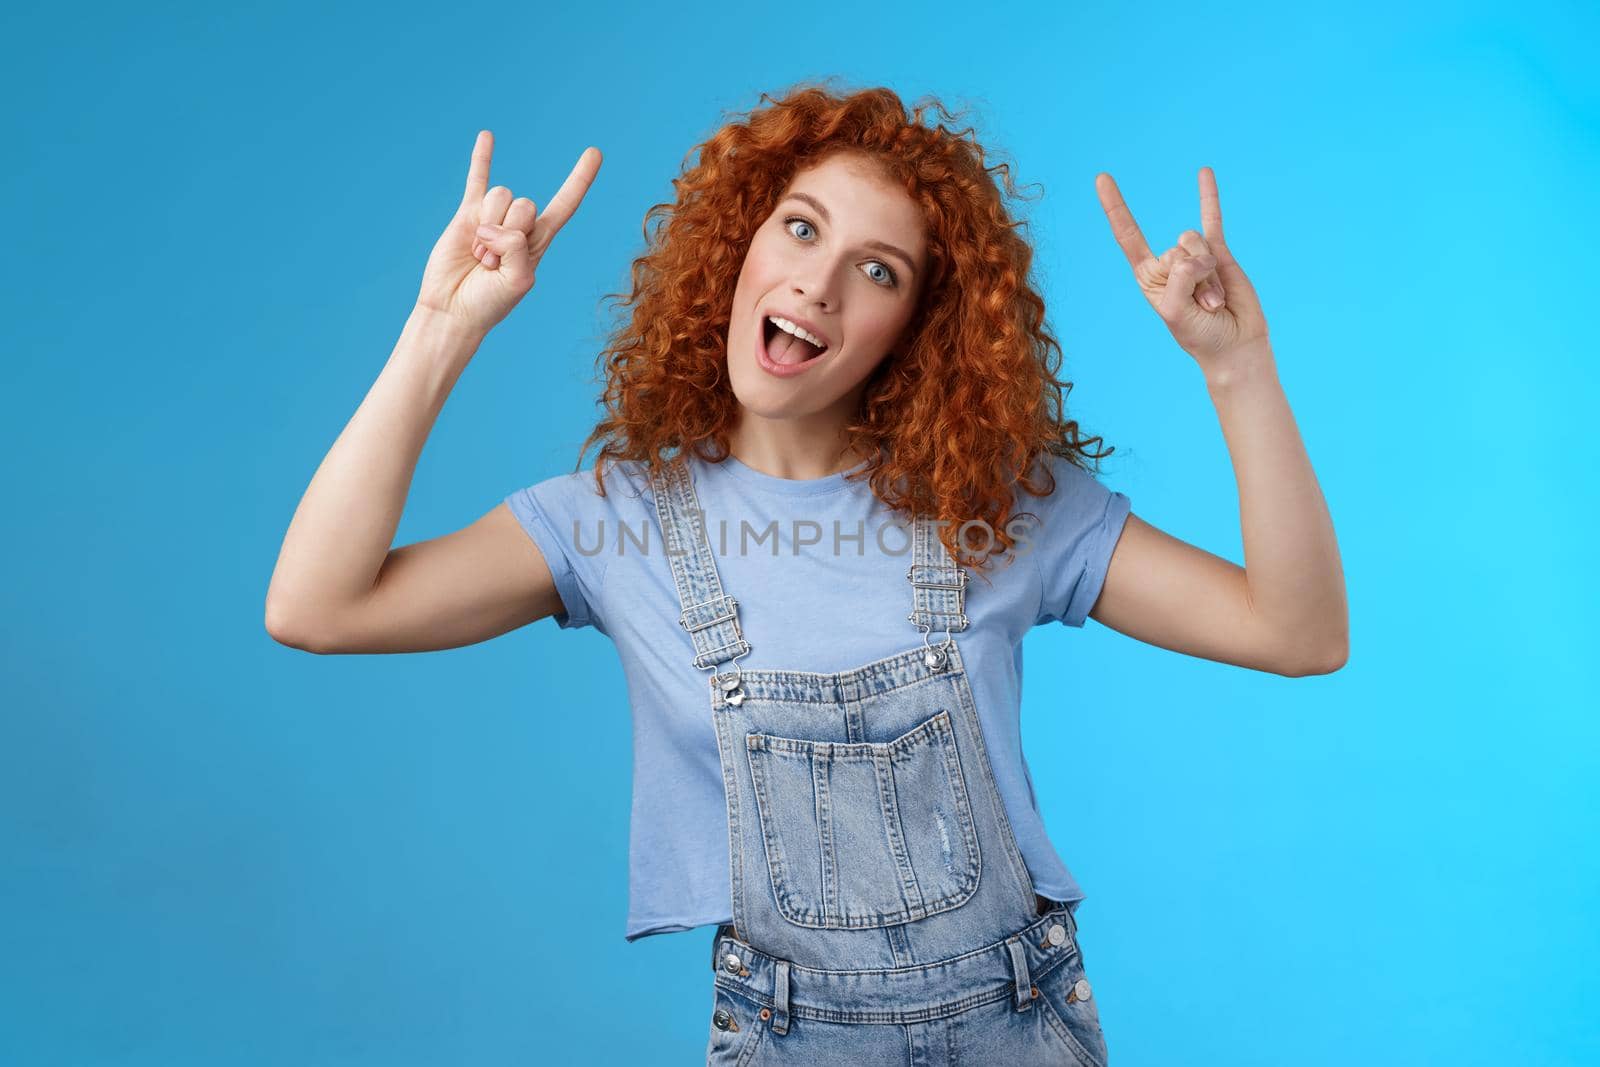 Daring cool stylish awesome redhead cheerful curly-haired girl tilt head show tongue joyfully stare camera playful raise hands rock-n-roll heavy metal gesture having fun blue background.